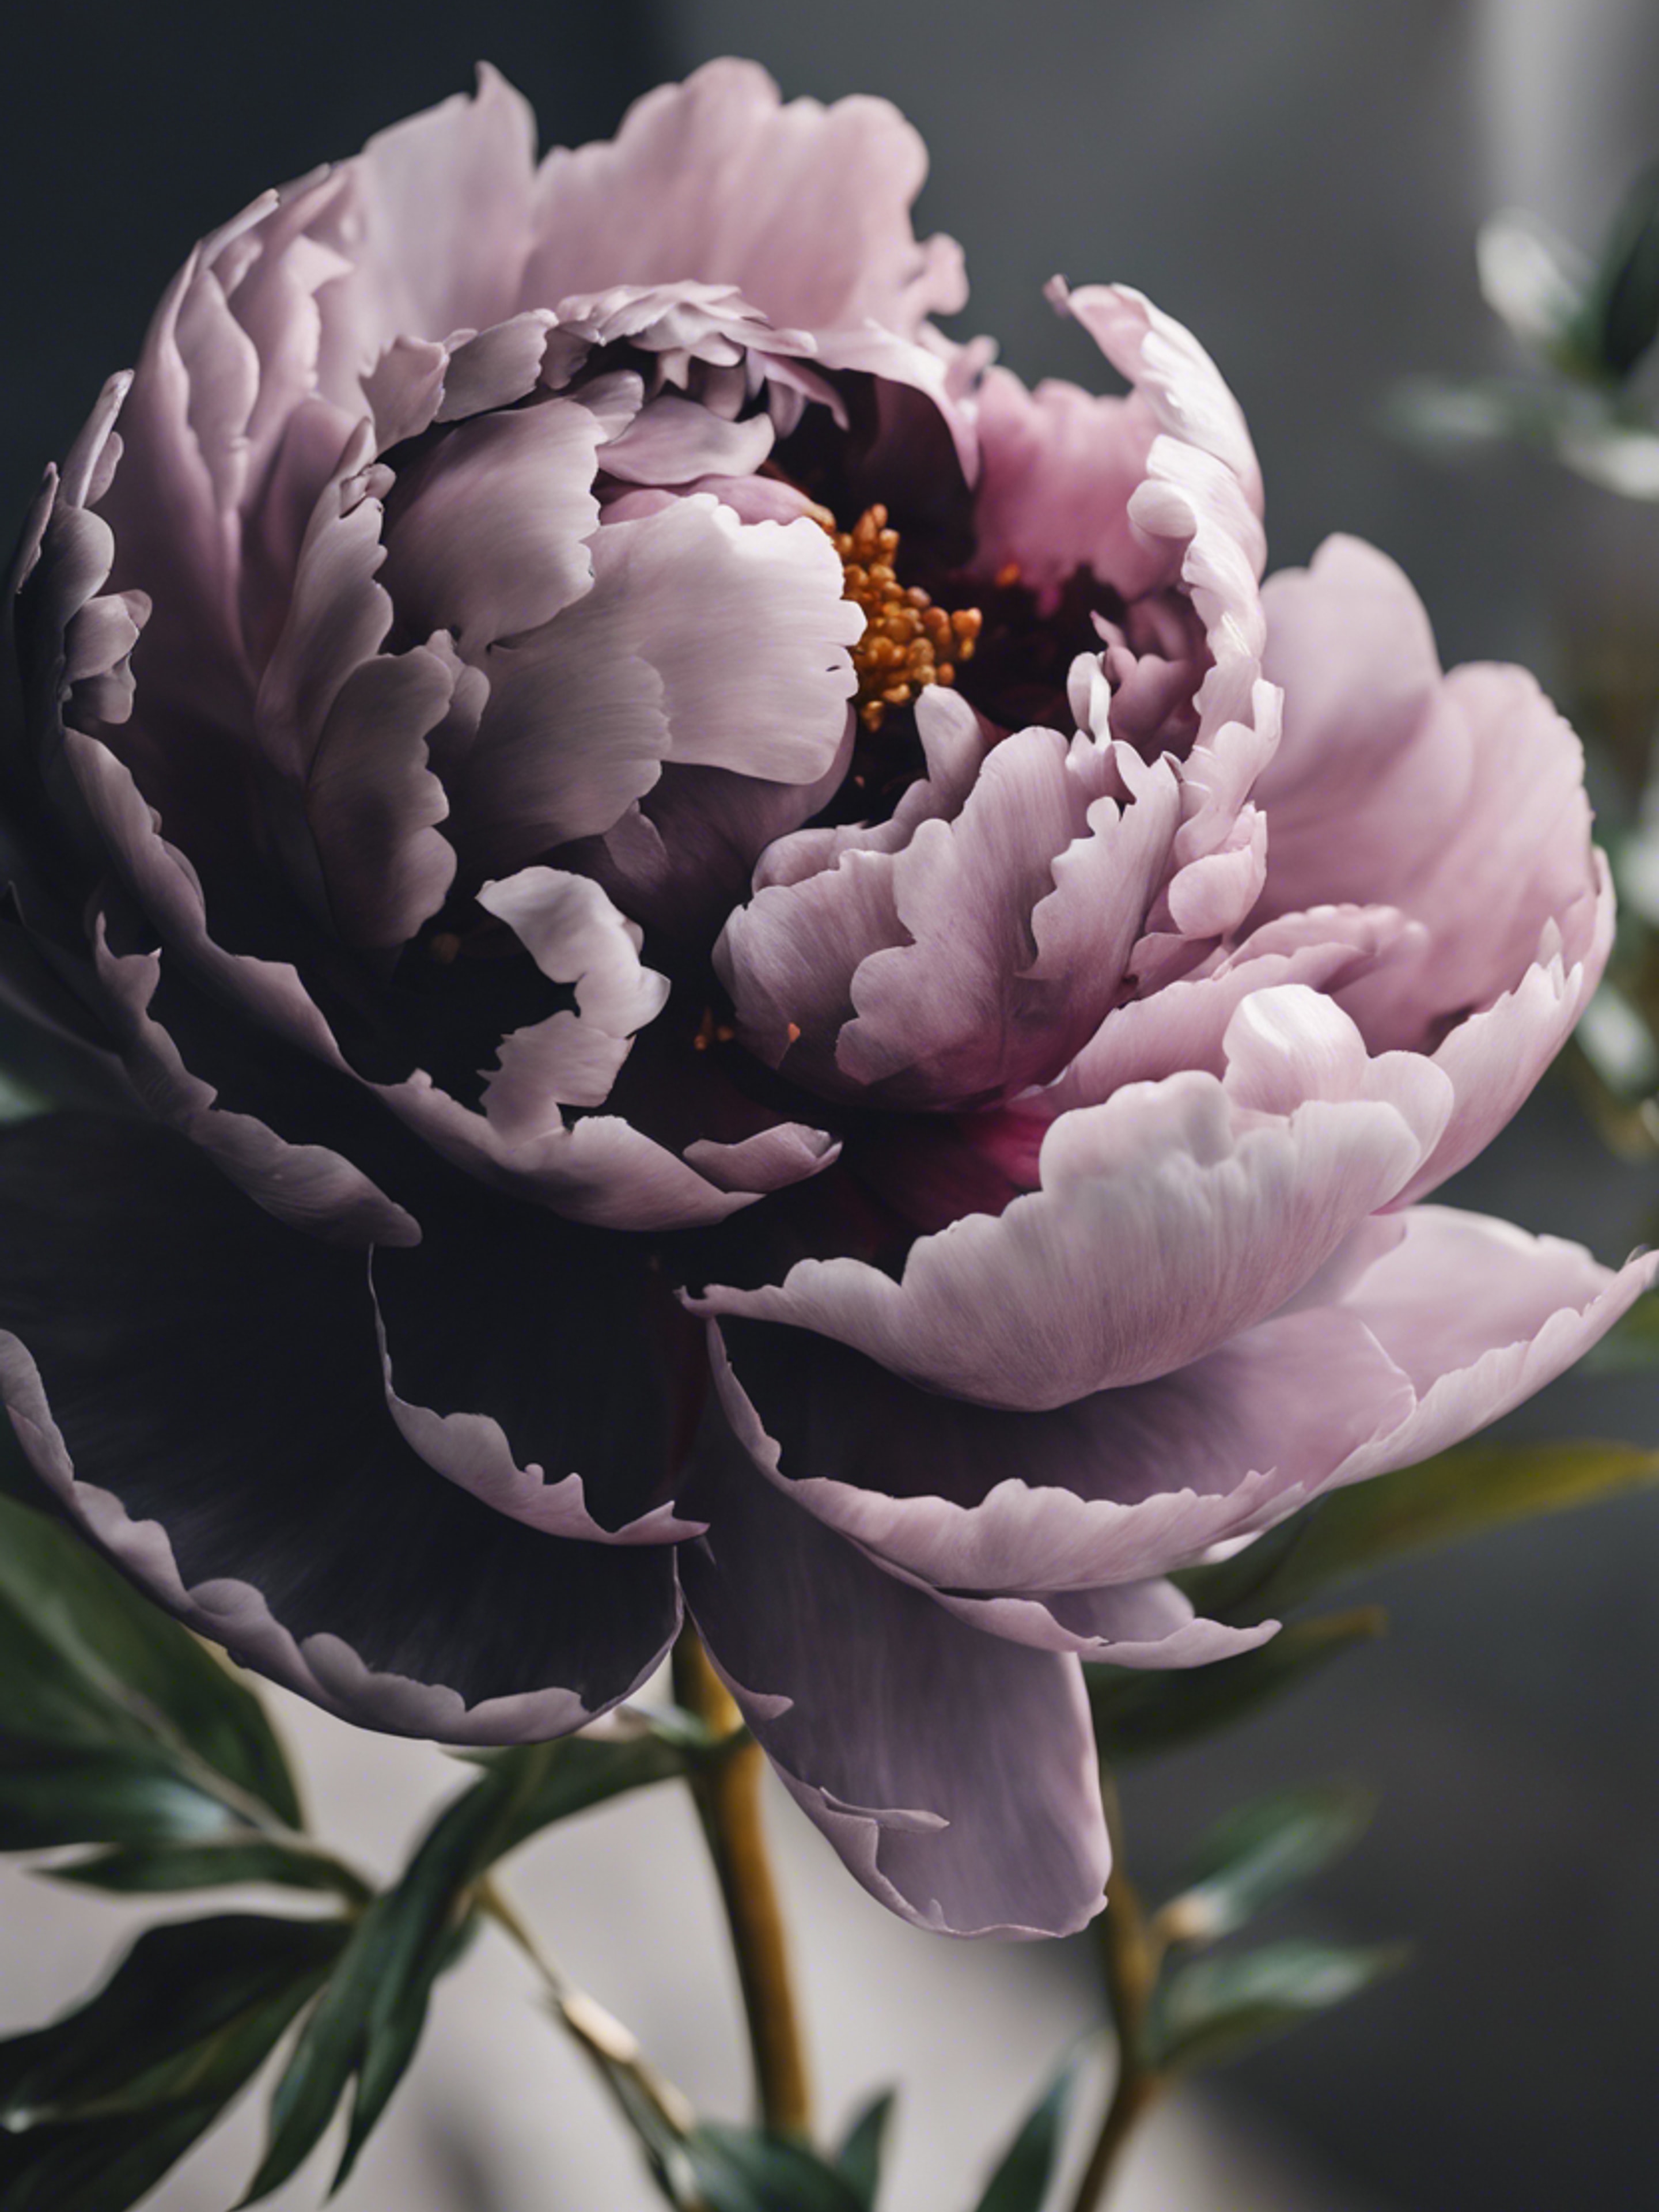 A black peony, the symbol of prosperity and honor, complementing a traditional Asian painting. טפט[2c78f74174874eadaf7e]